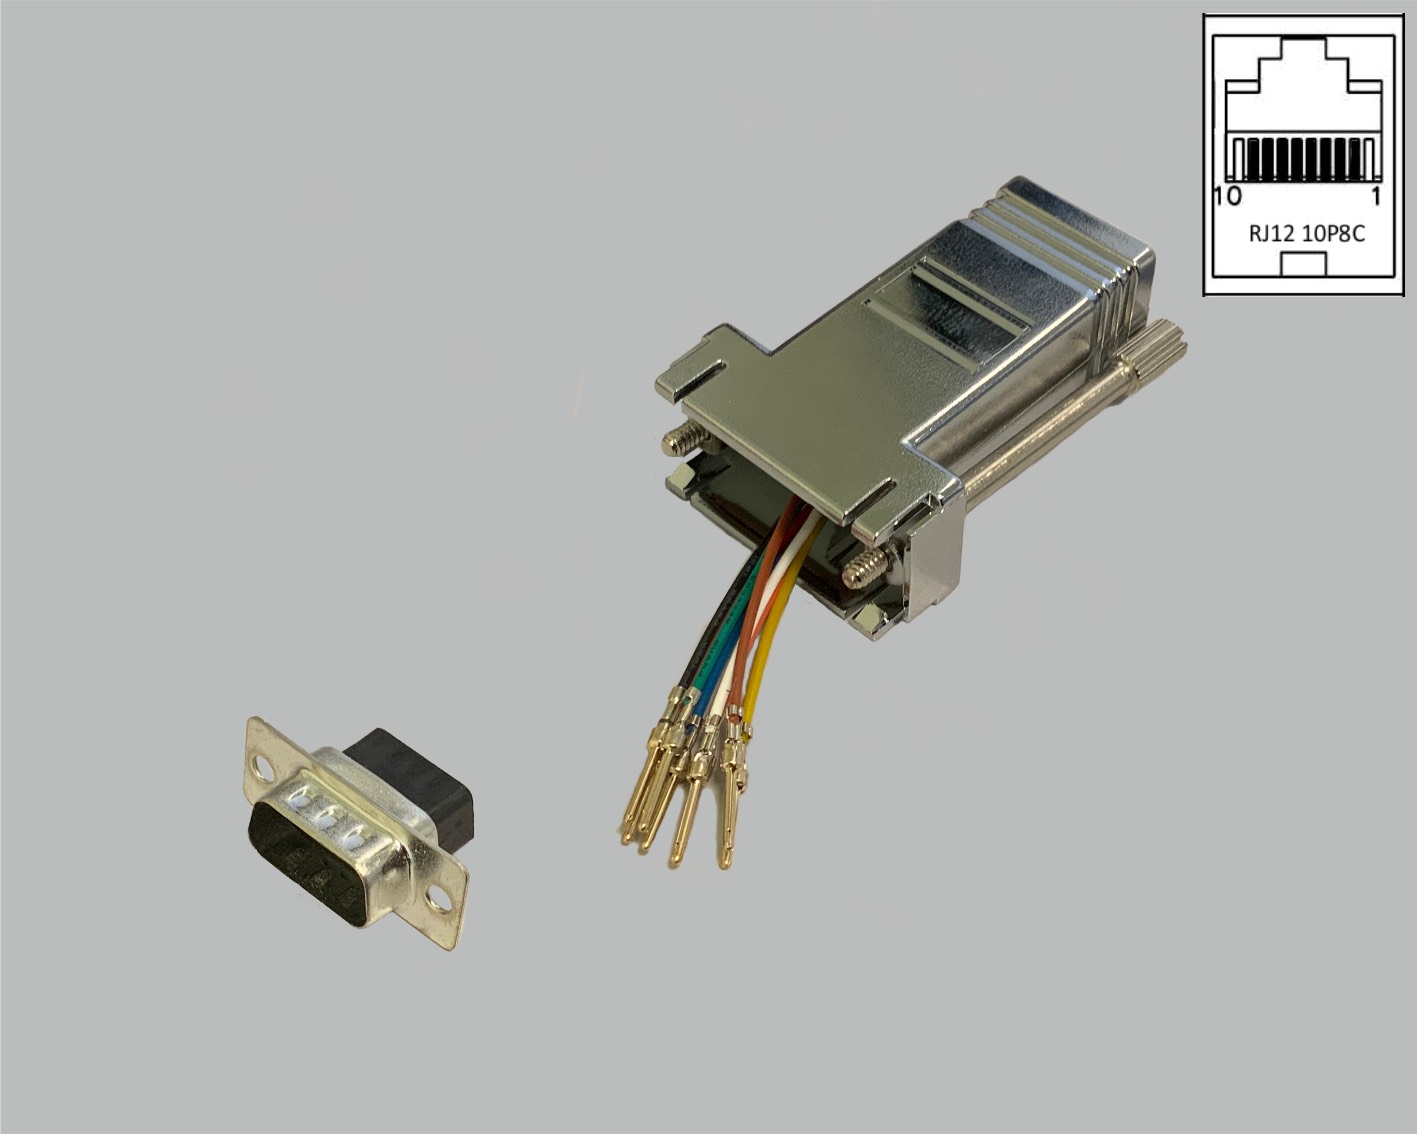 D-Sub/RJ adapter, freely configurable, D-Sub male connector 9-pole to RJ45 (10P8C) female connector, metallised